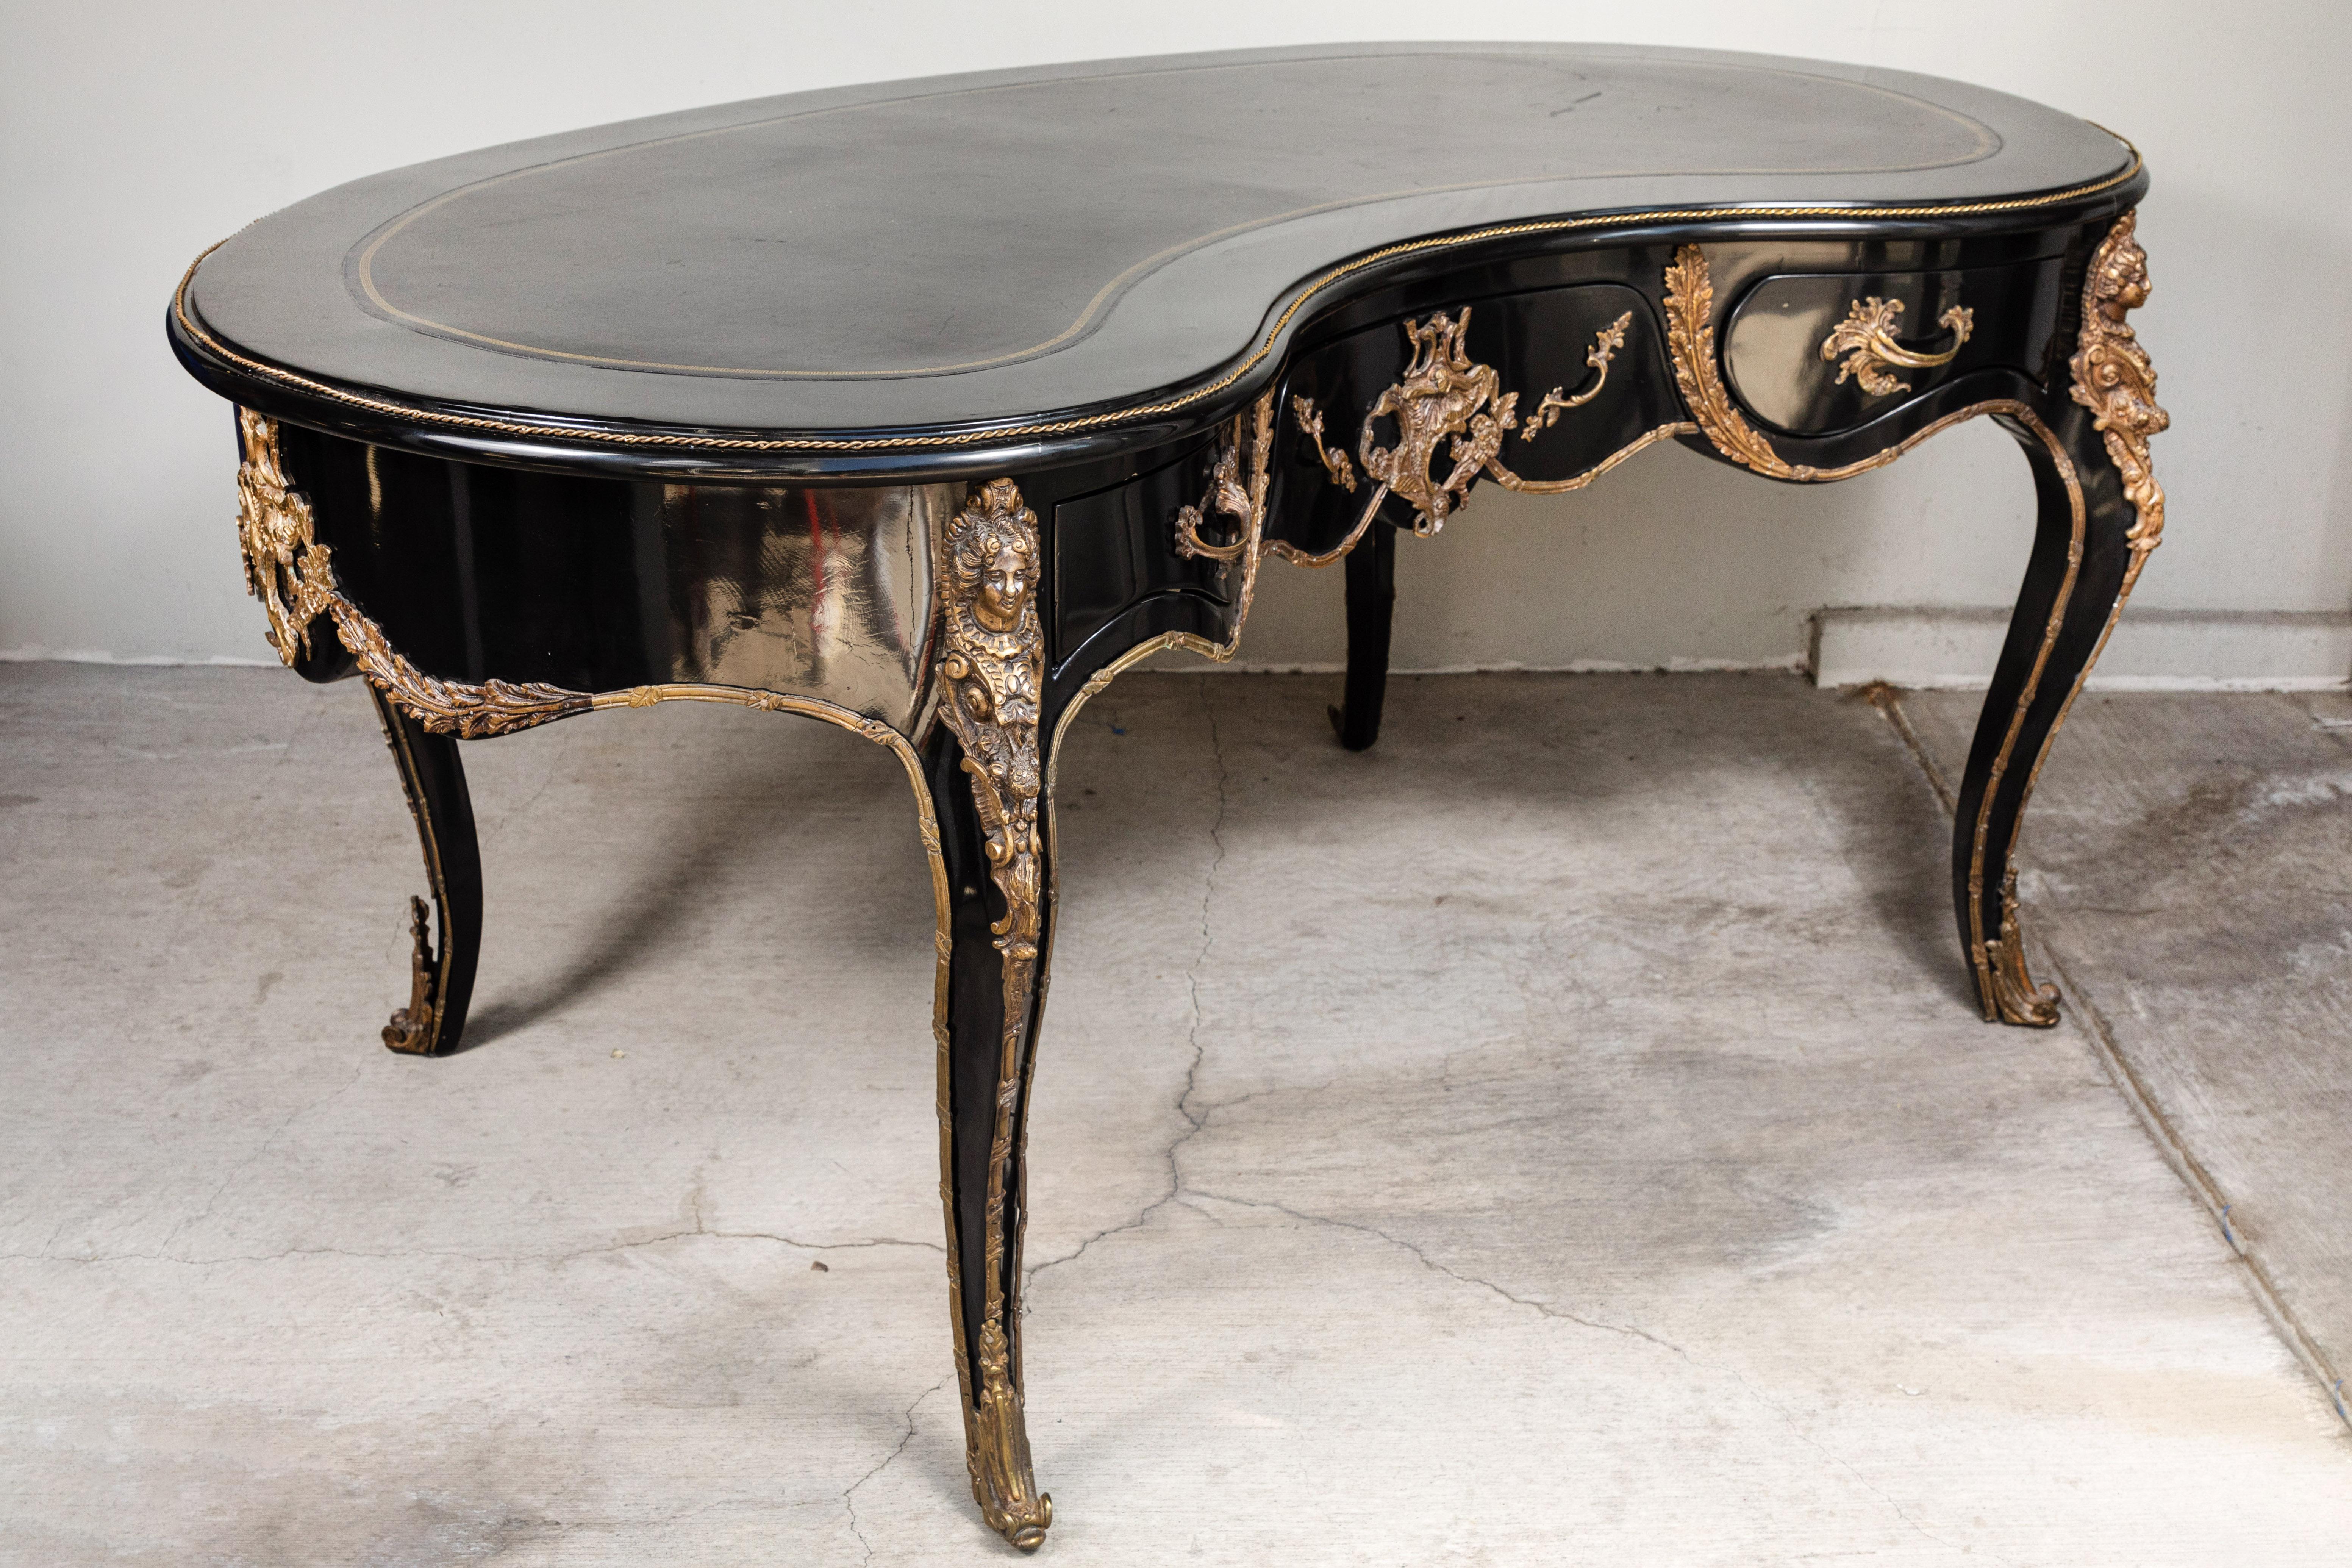 Monumentally sized French desk, late 19th century, kidney shaped, in black lacquer, with bronze ormolu trim and an inset black leather top with gold detailing The size of this desk is unusually large for a French desk of this period and would mix